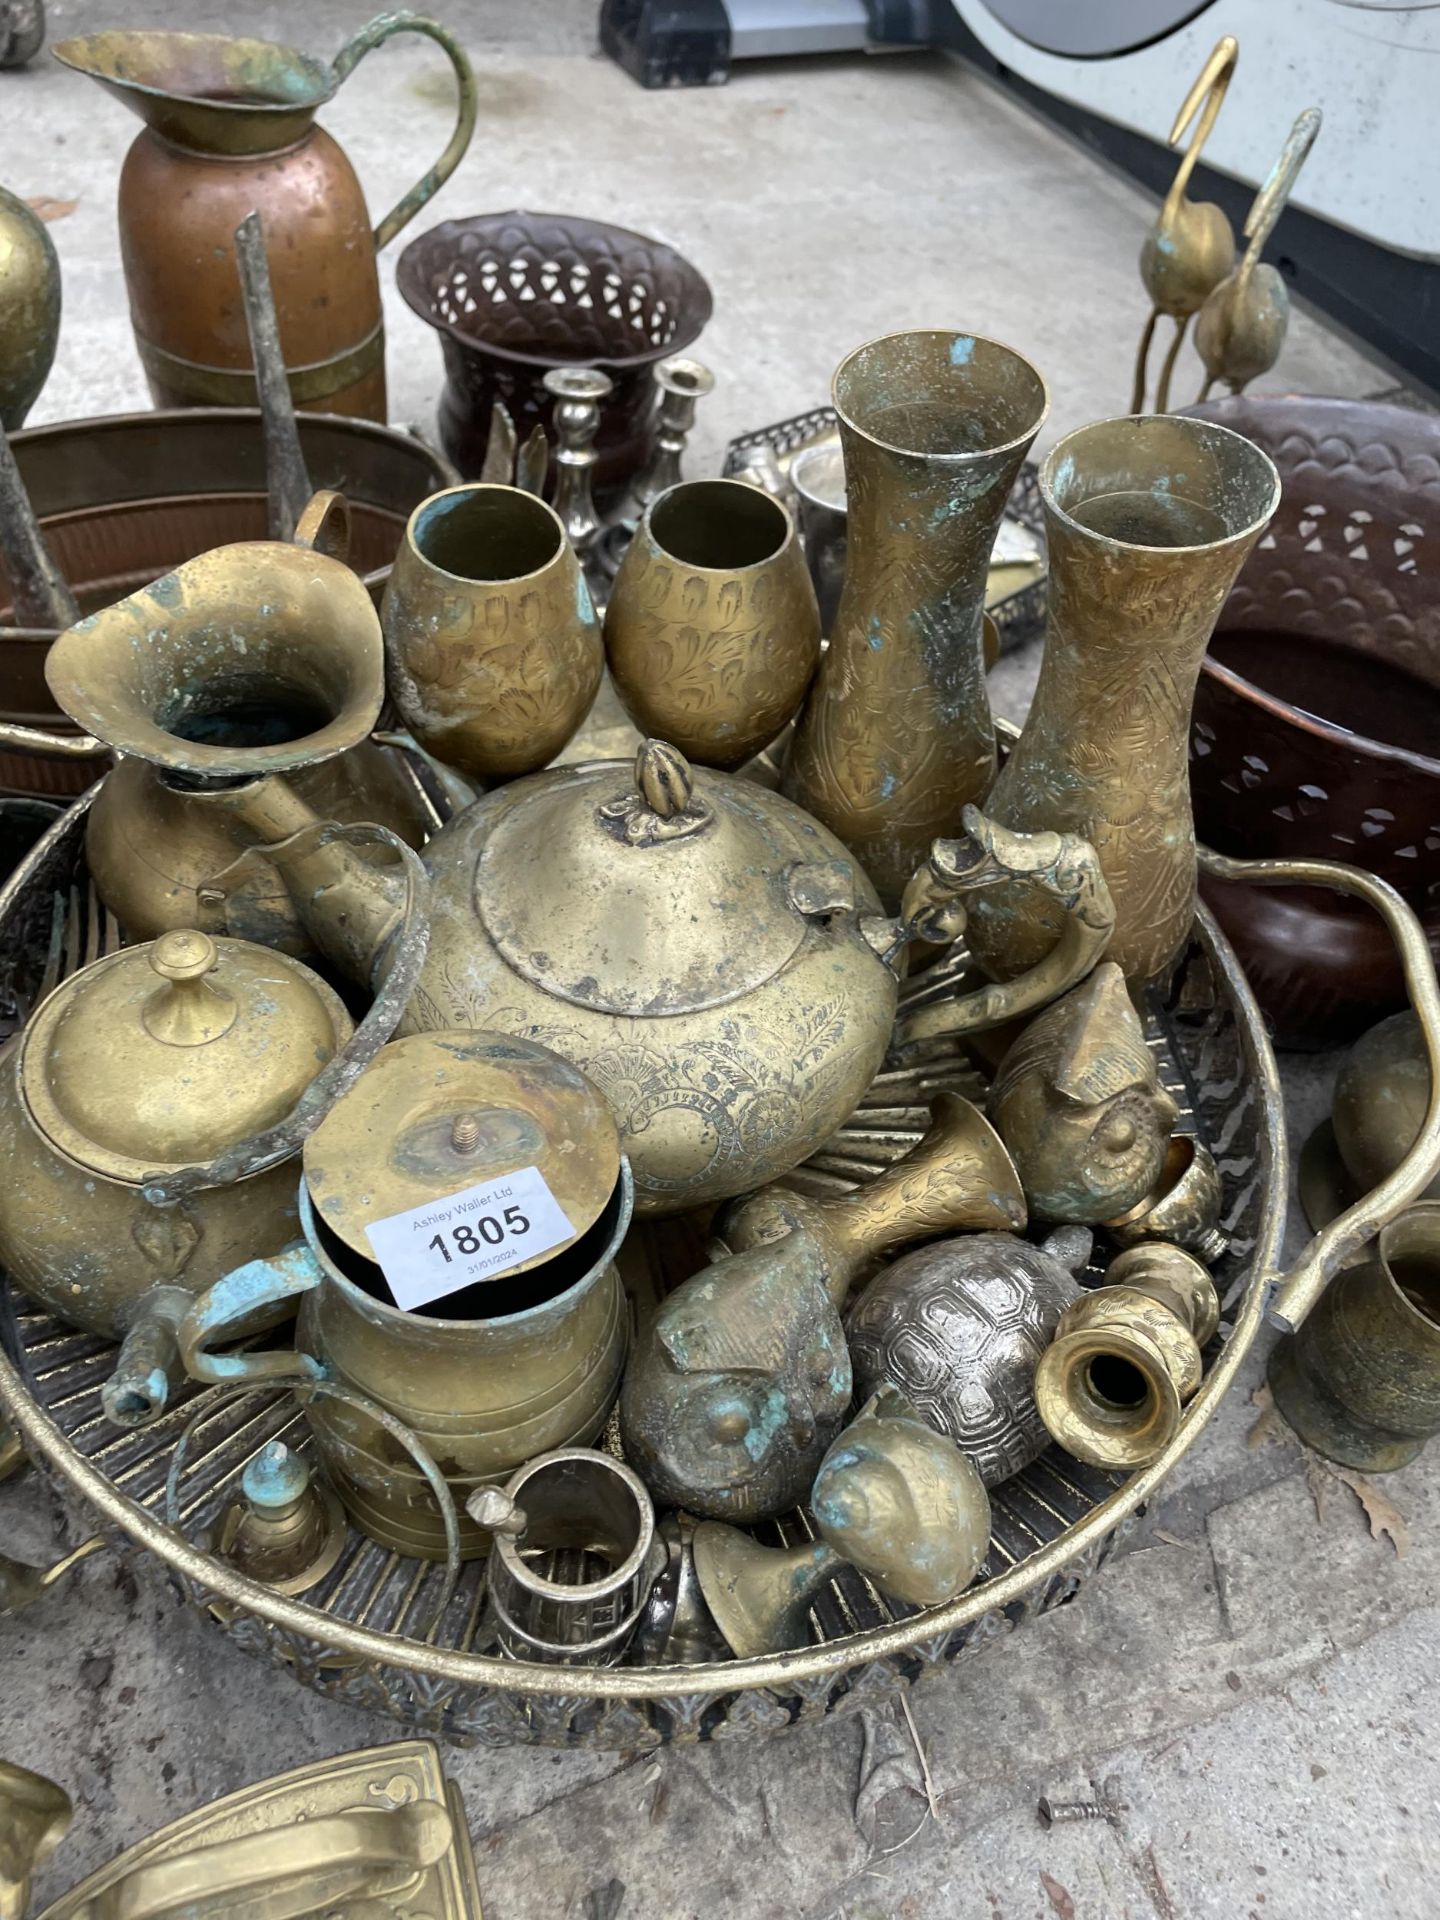 A LARGE ASSORTMENT OF METAL WARE ITEMS TO INCLUDE A COPPER VASE, BRASS GOBLETS AND BRASS FIGURES ETC - Image 4 of 6